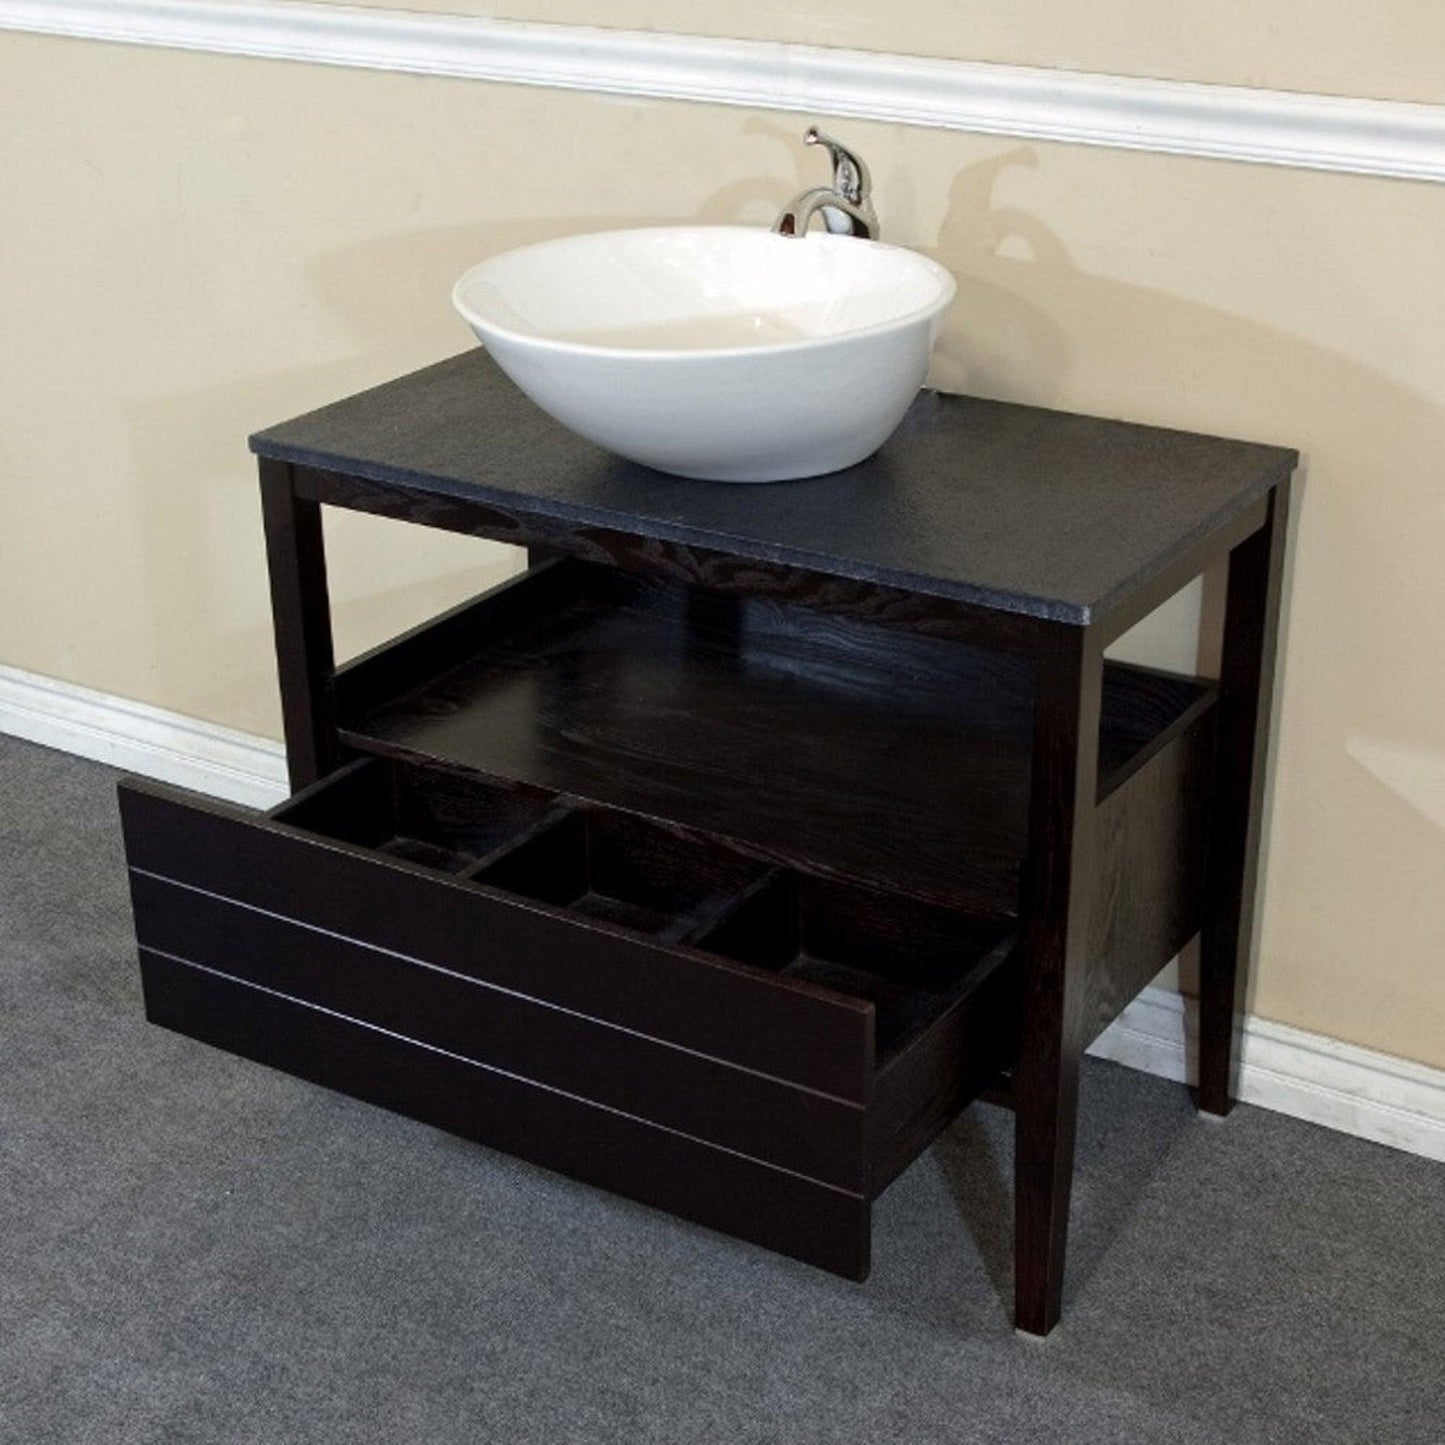 Bellaterra Home 36" 1-Drawer Black Freestanding Vanity Set With Vitreous China Vessel Sink and Burnt Stone Top